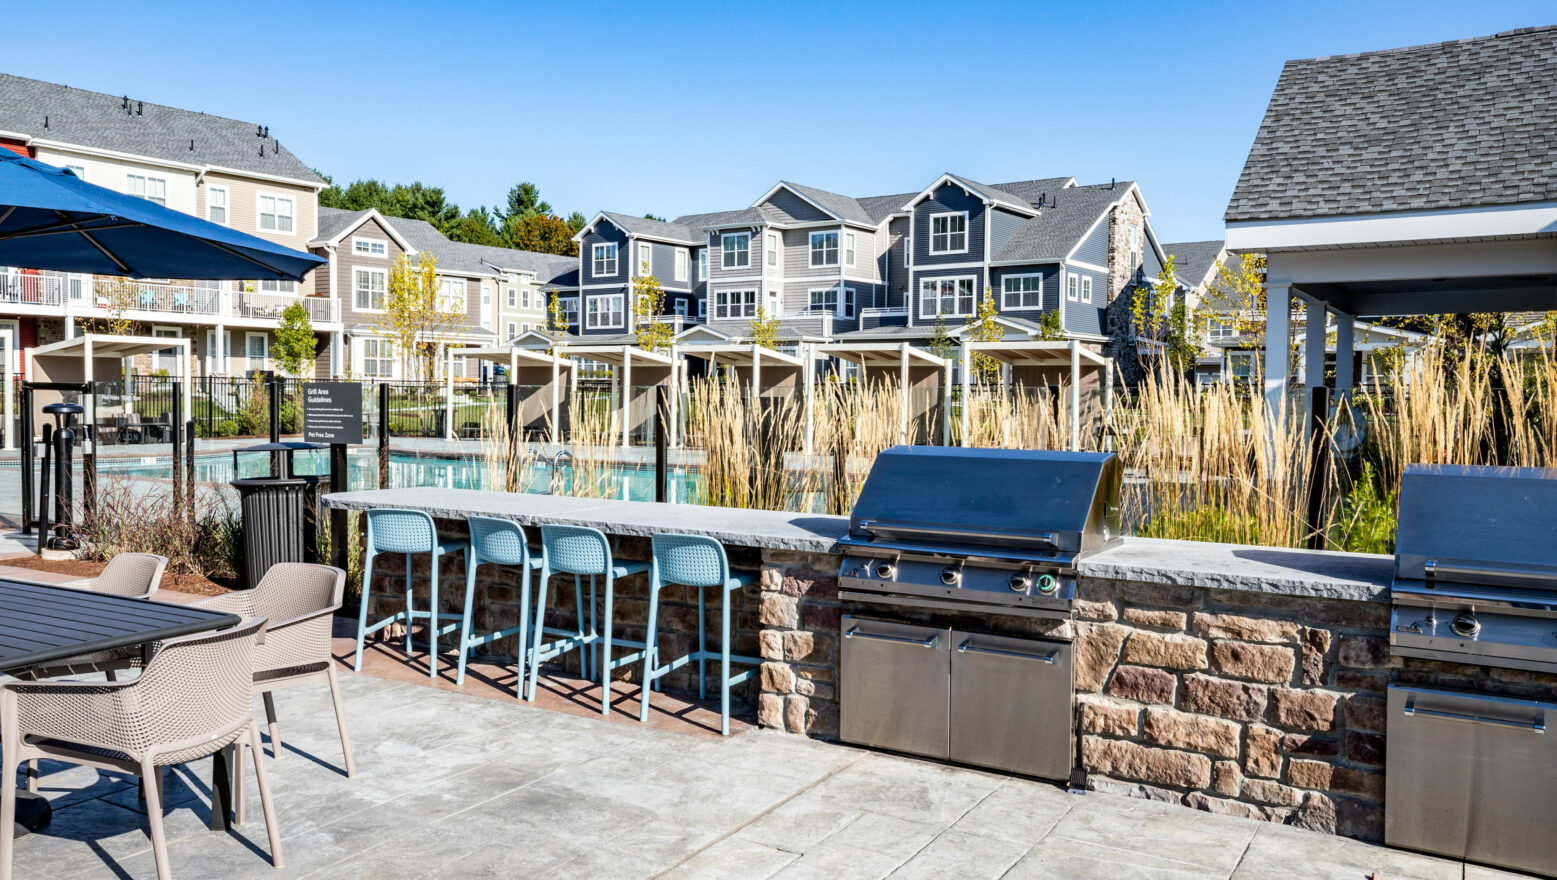 Outside BBQ and stools by a pool at Avalon Apartments. Dex by Terra design-build project.